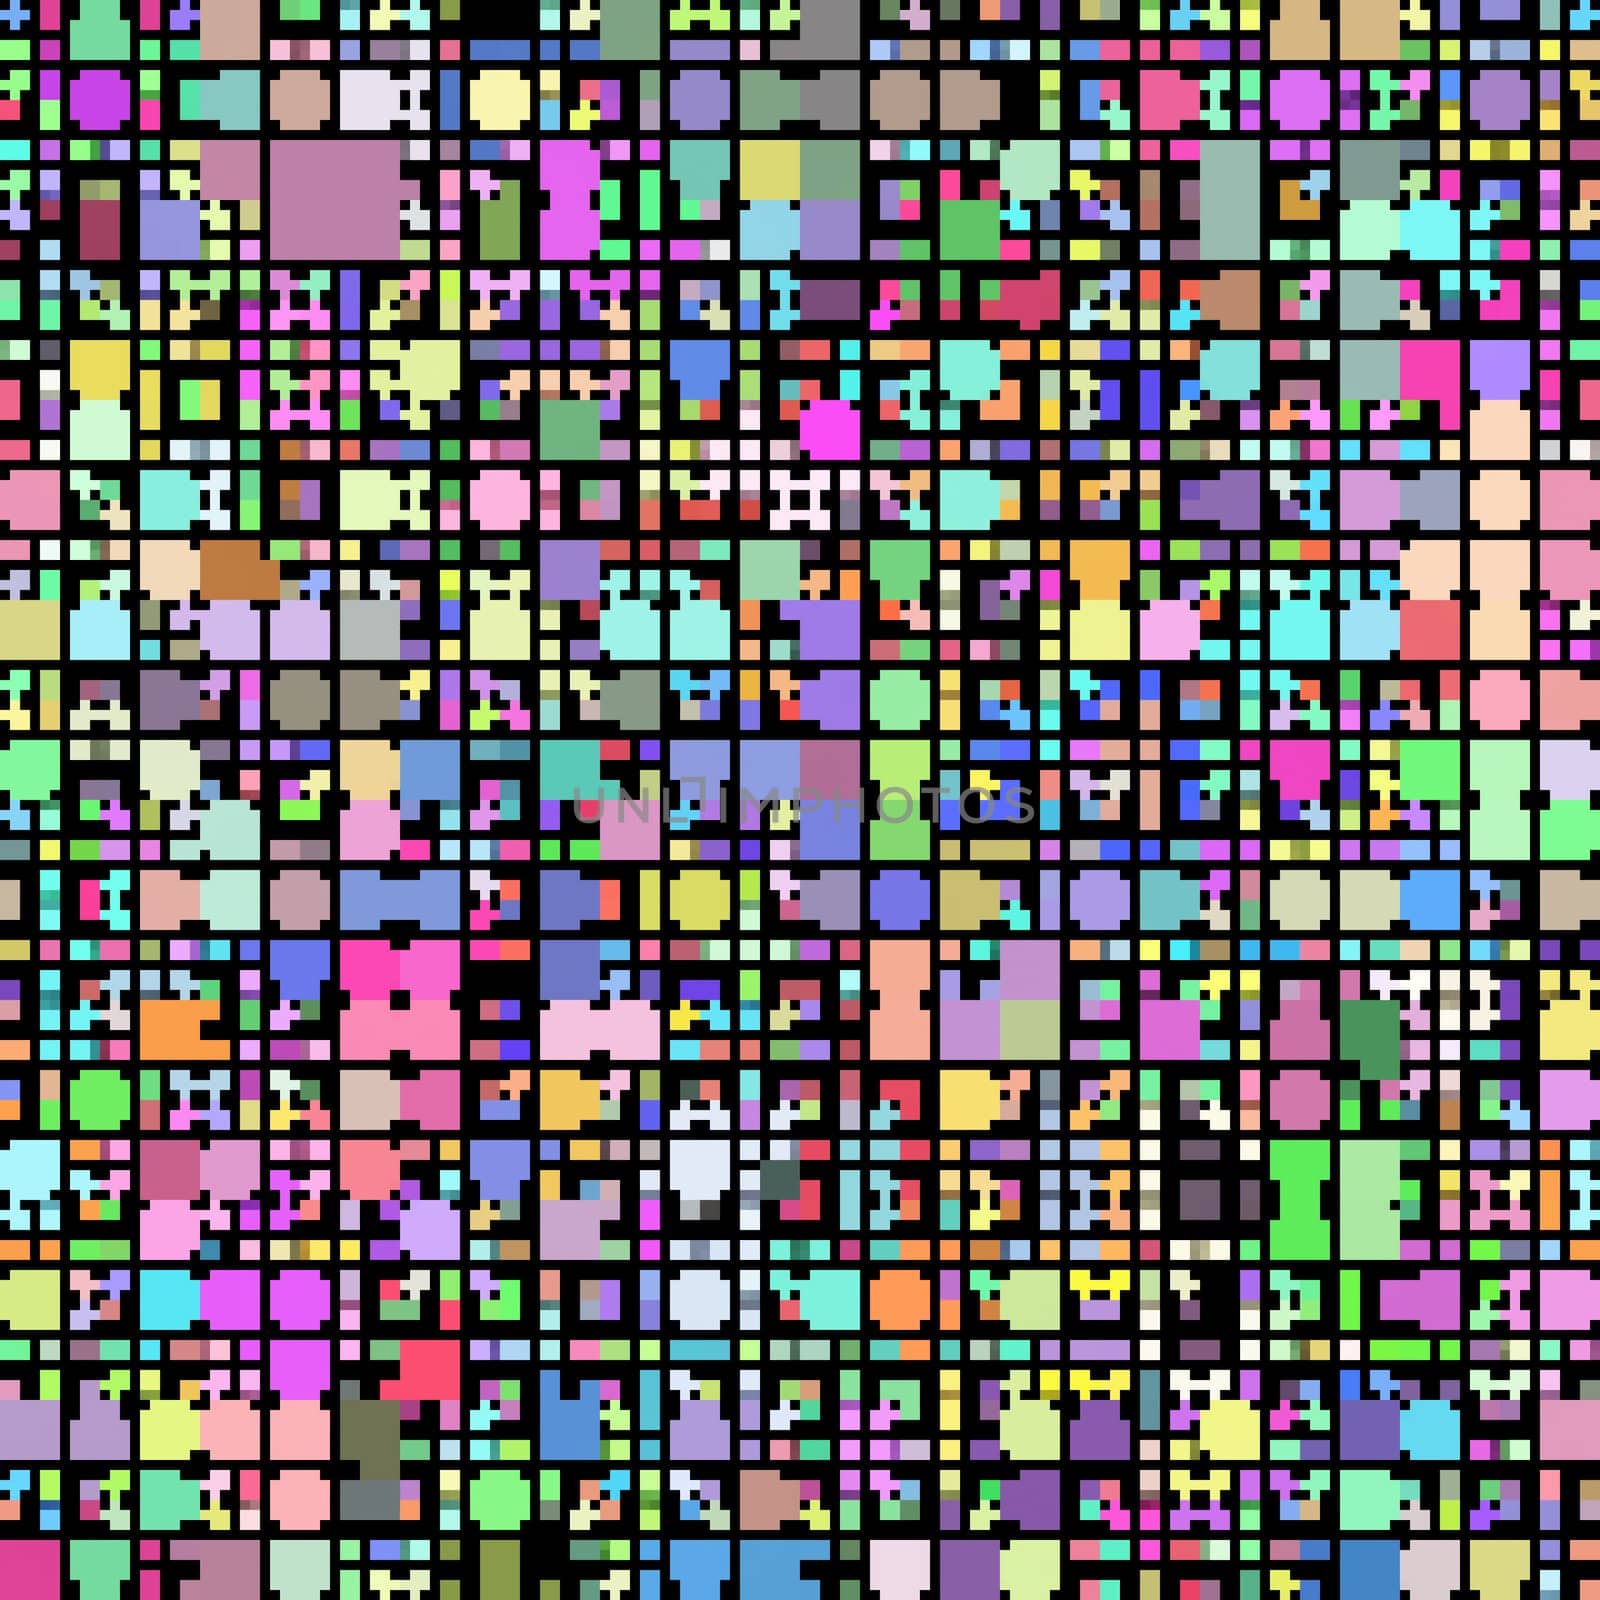  texture of vibrant colorful blocks and squares